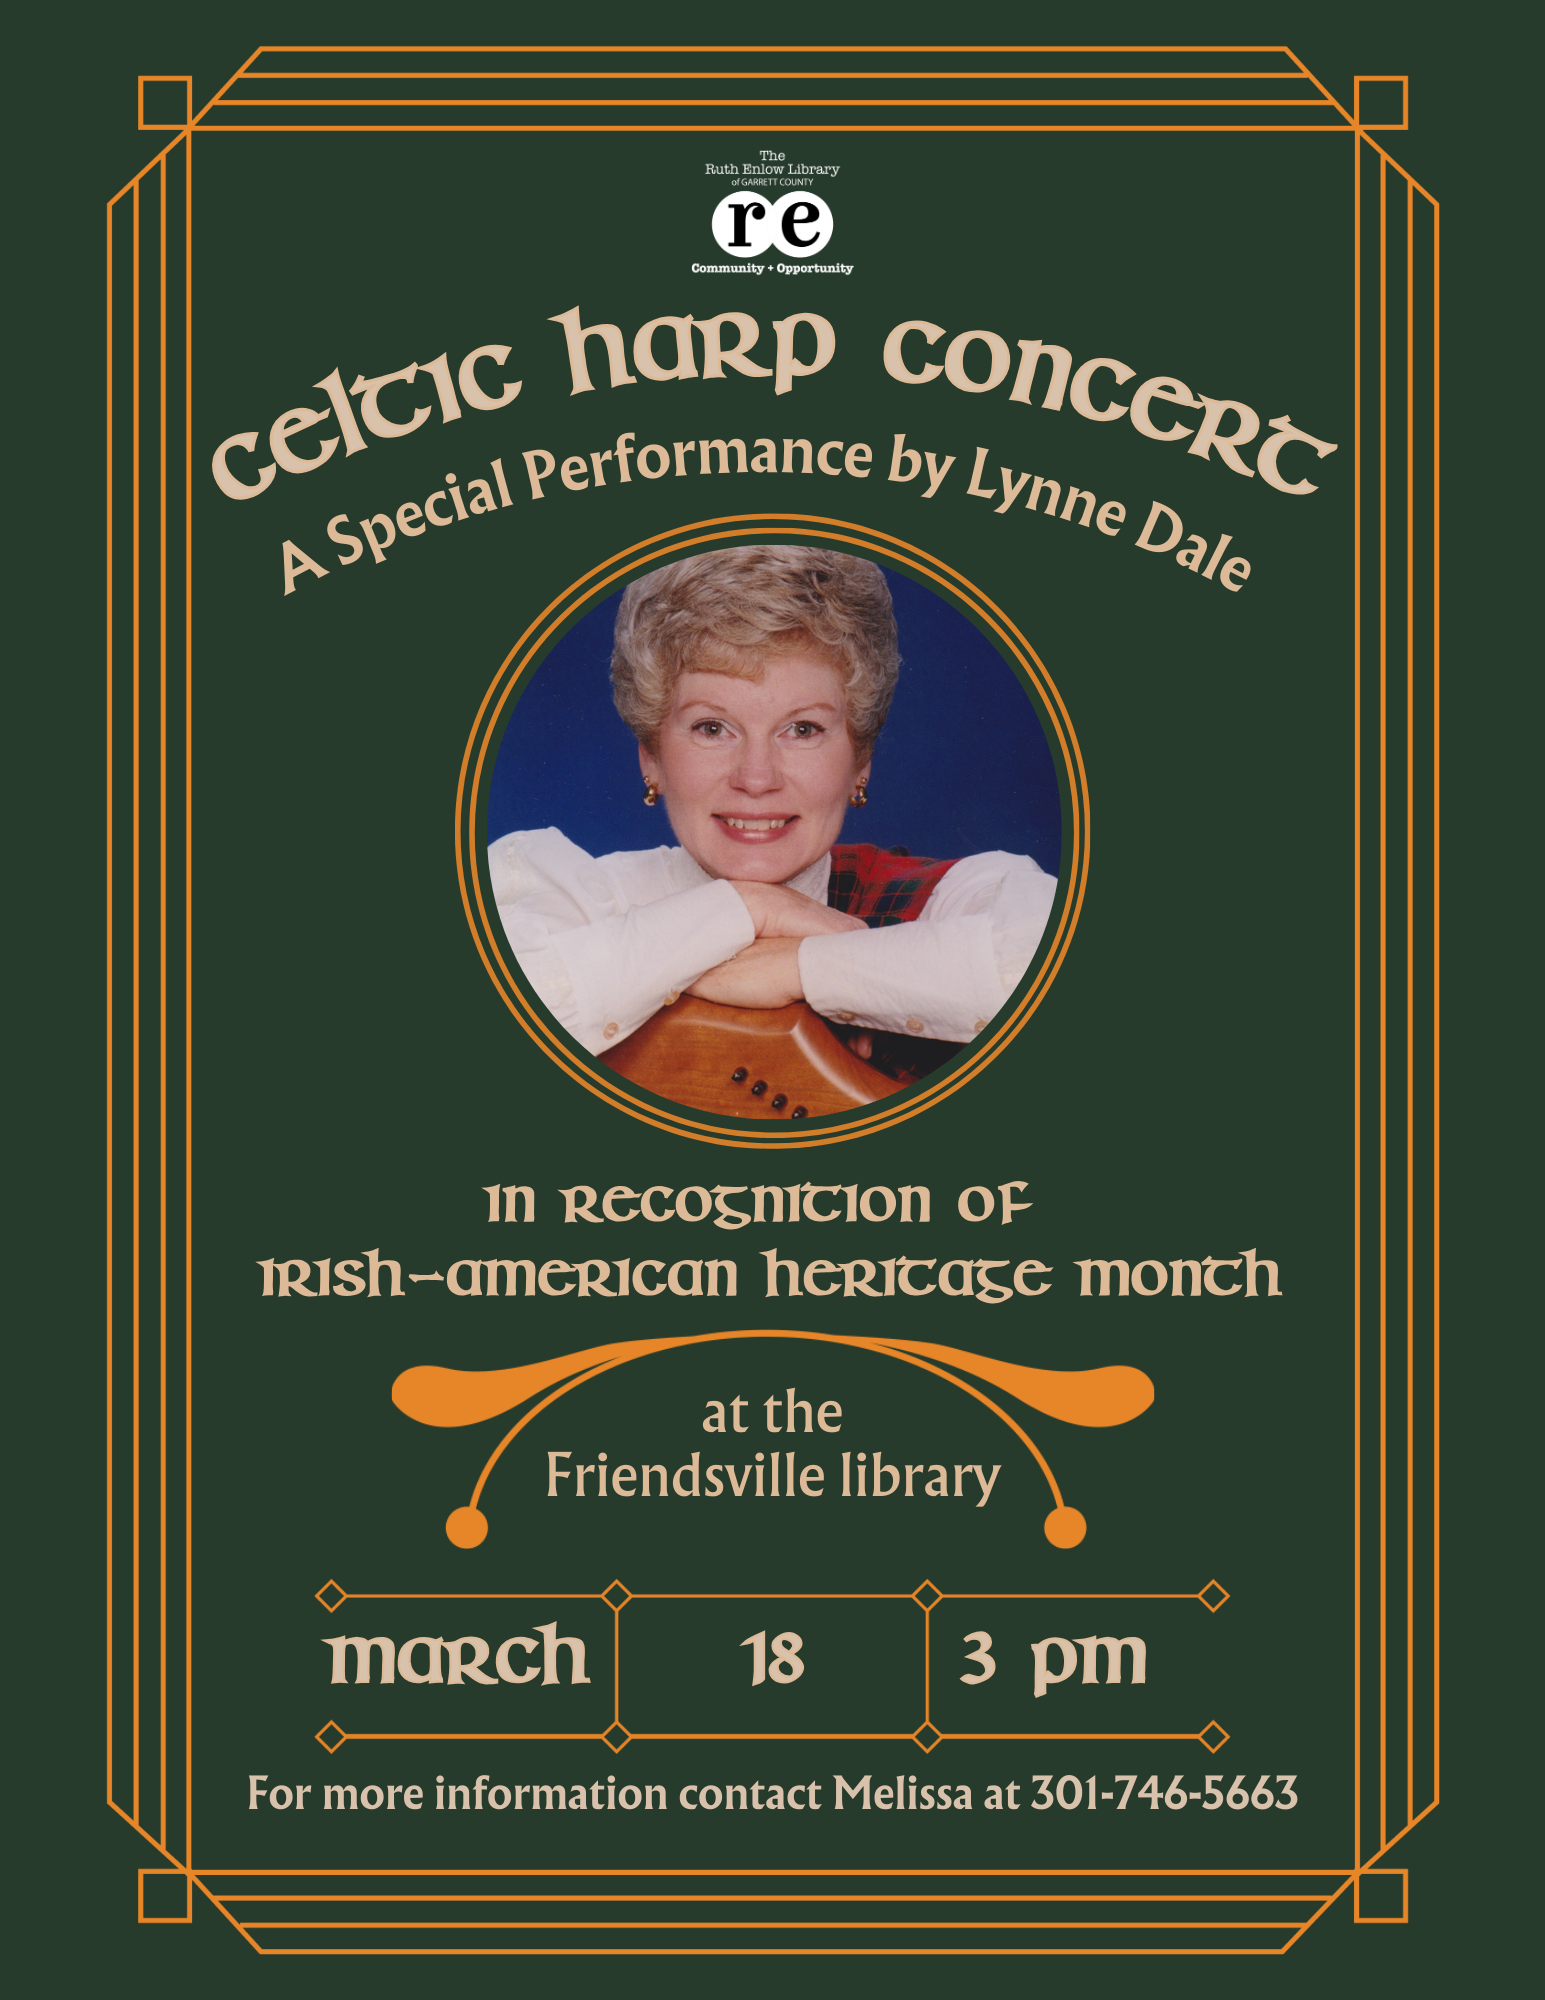 Image of celtic harp performer Lynne Dale with additional performance information for an upcoming concert.